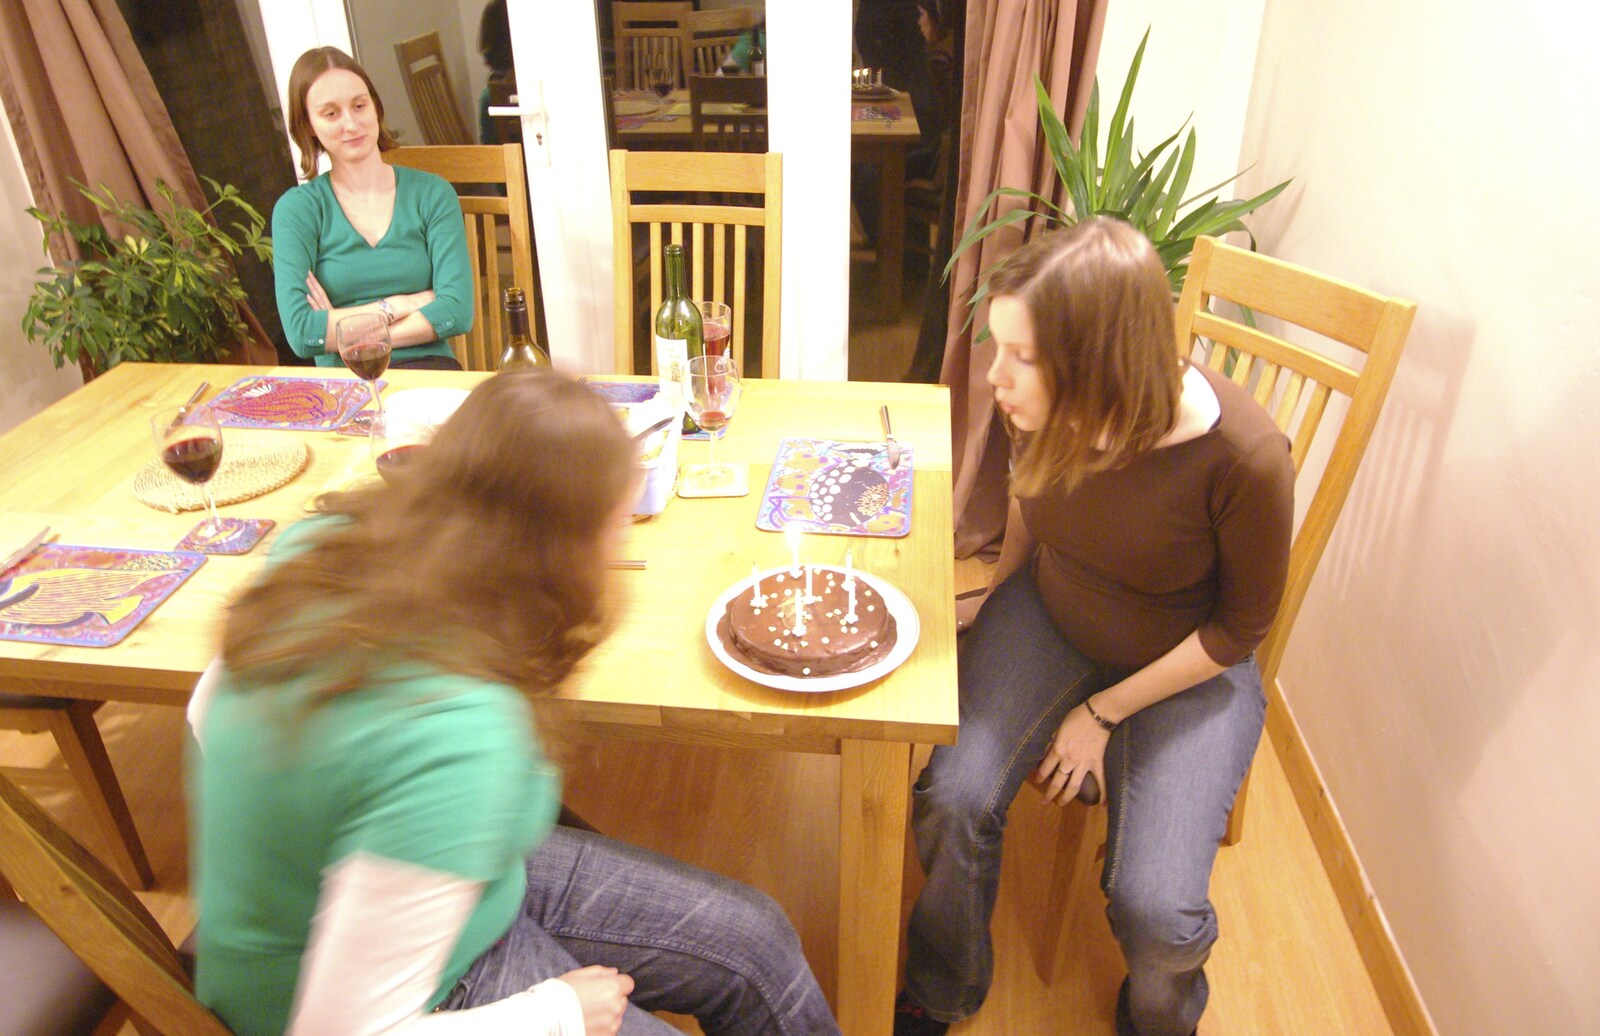 Isobel helps blow the candles out from Fireworks, and Dinner at Caroline and John's, Cambridge - 5th November 2007